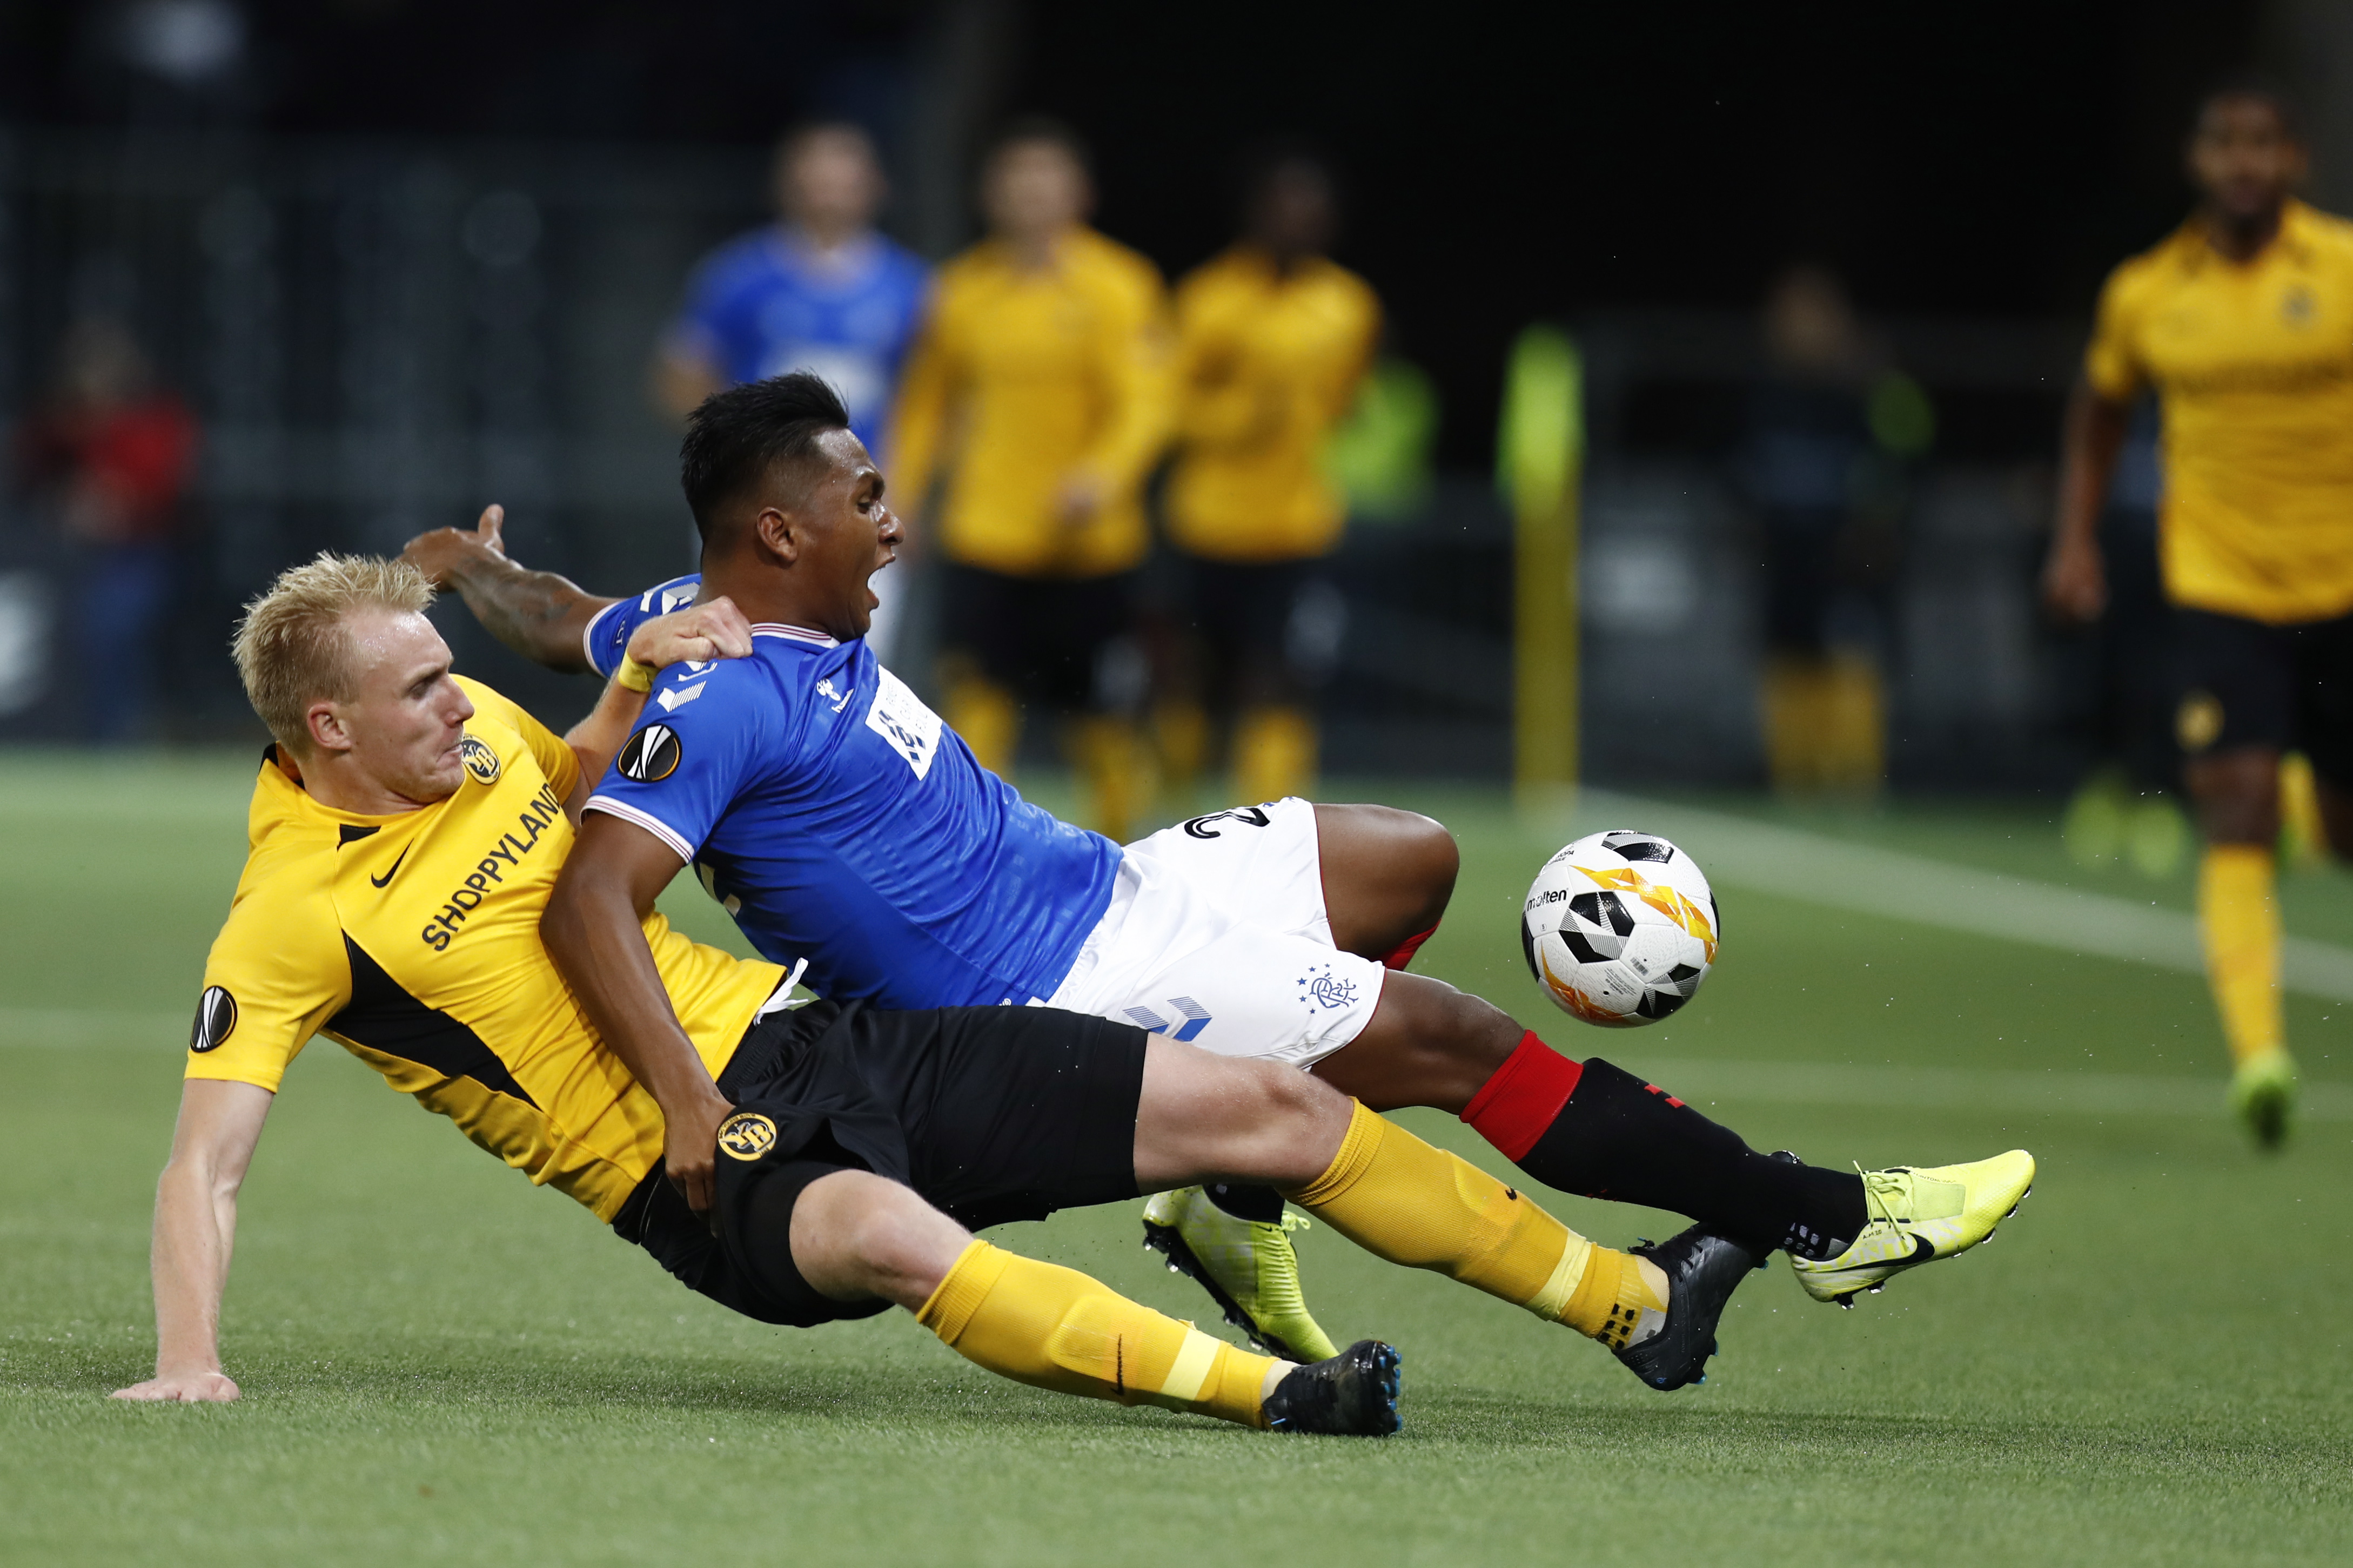 epa07893031 Young Boys' Frederik Soerensen (L) and Glasgow's Alfredo Morelos in action during the UEFA Europa League group G soccer match between BSC Young Boys Bern and Glasgow Rangers at the Stade de Suisse Stadium in Bern, Switzerland, 03 October 2019.  EPA/PETER KLAUNZER